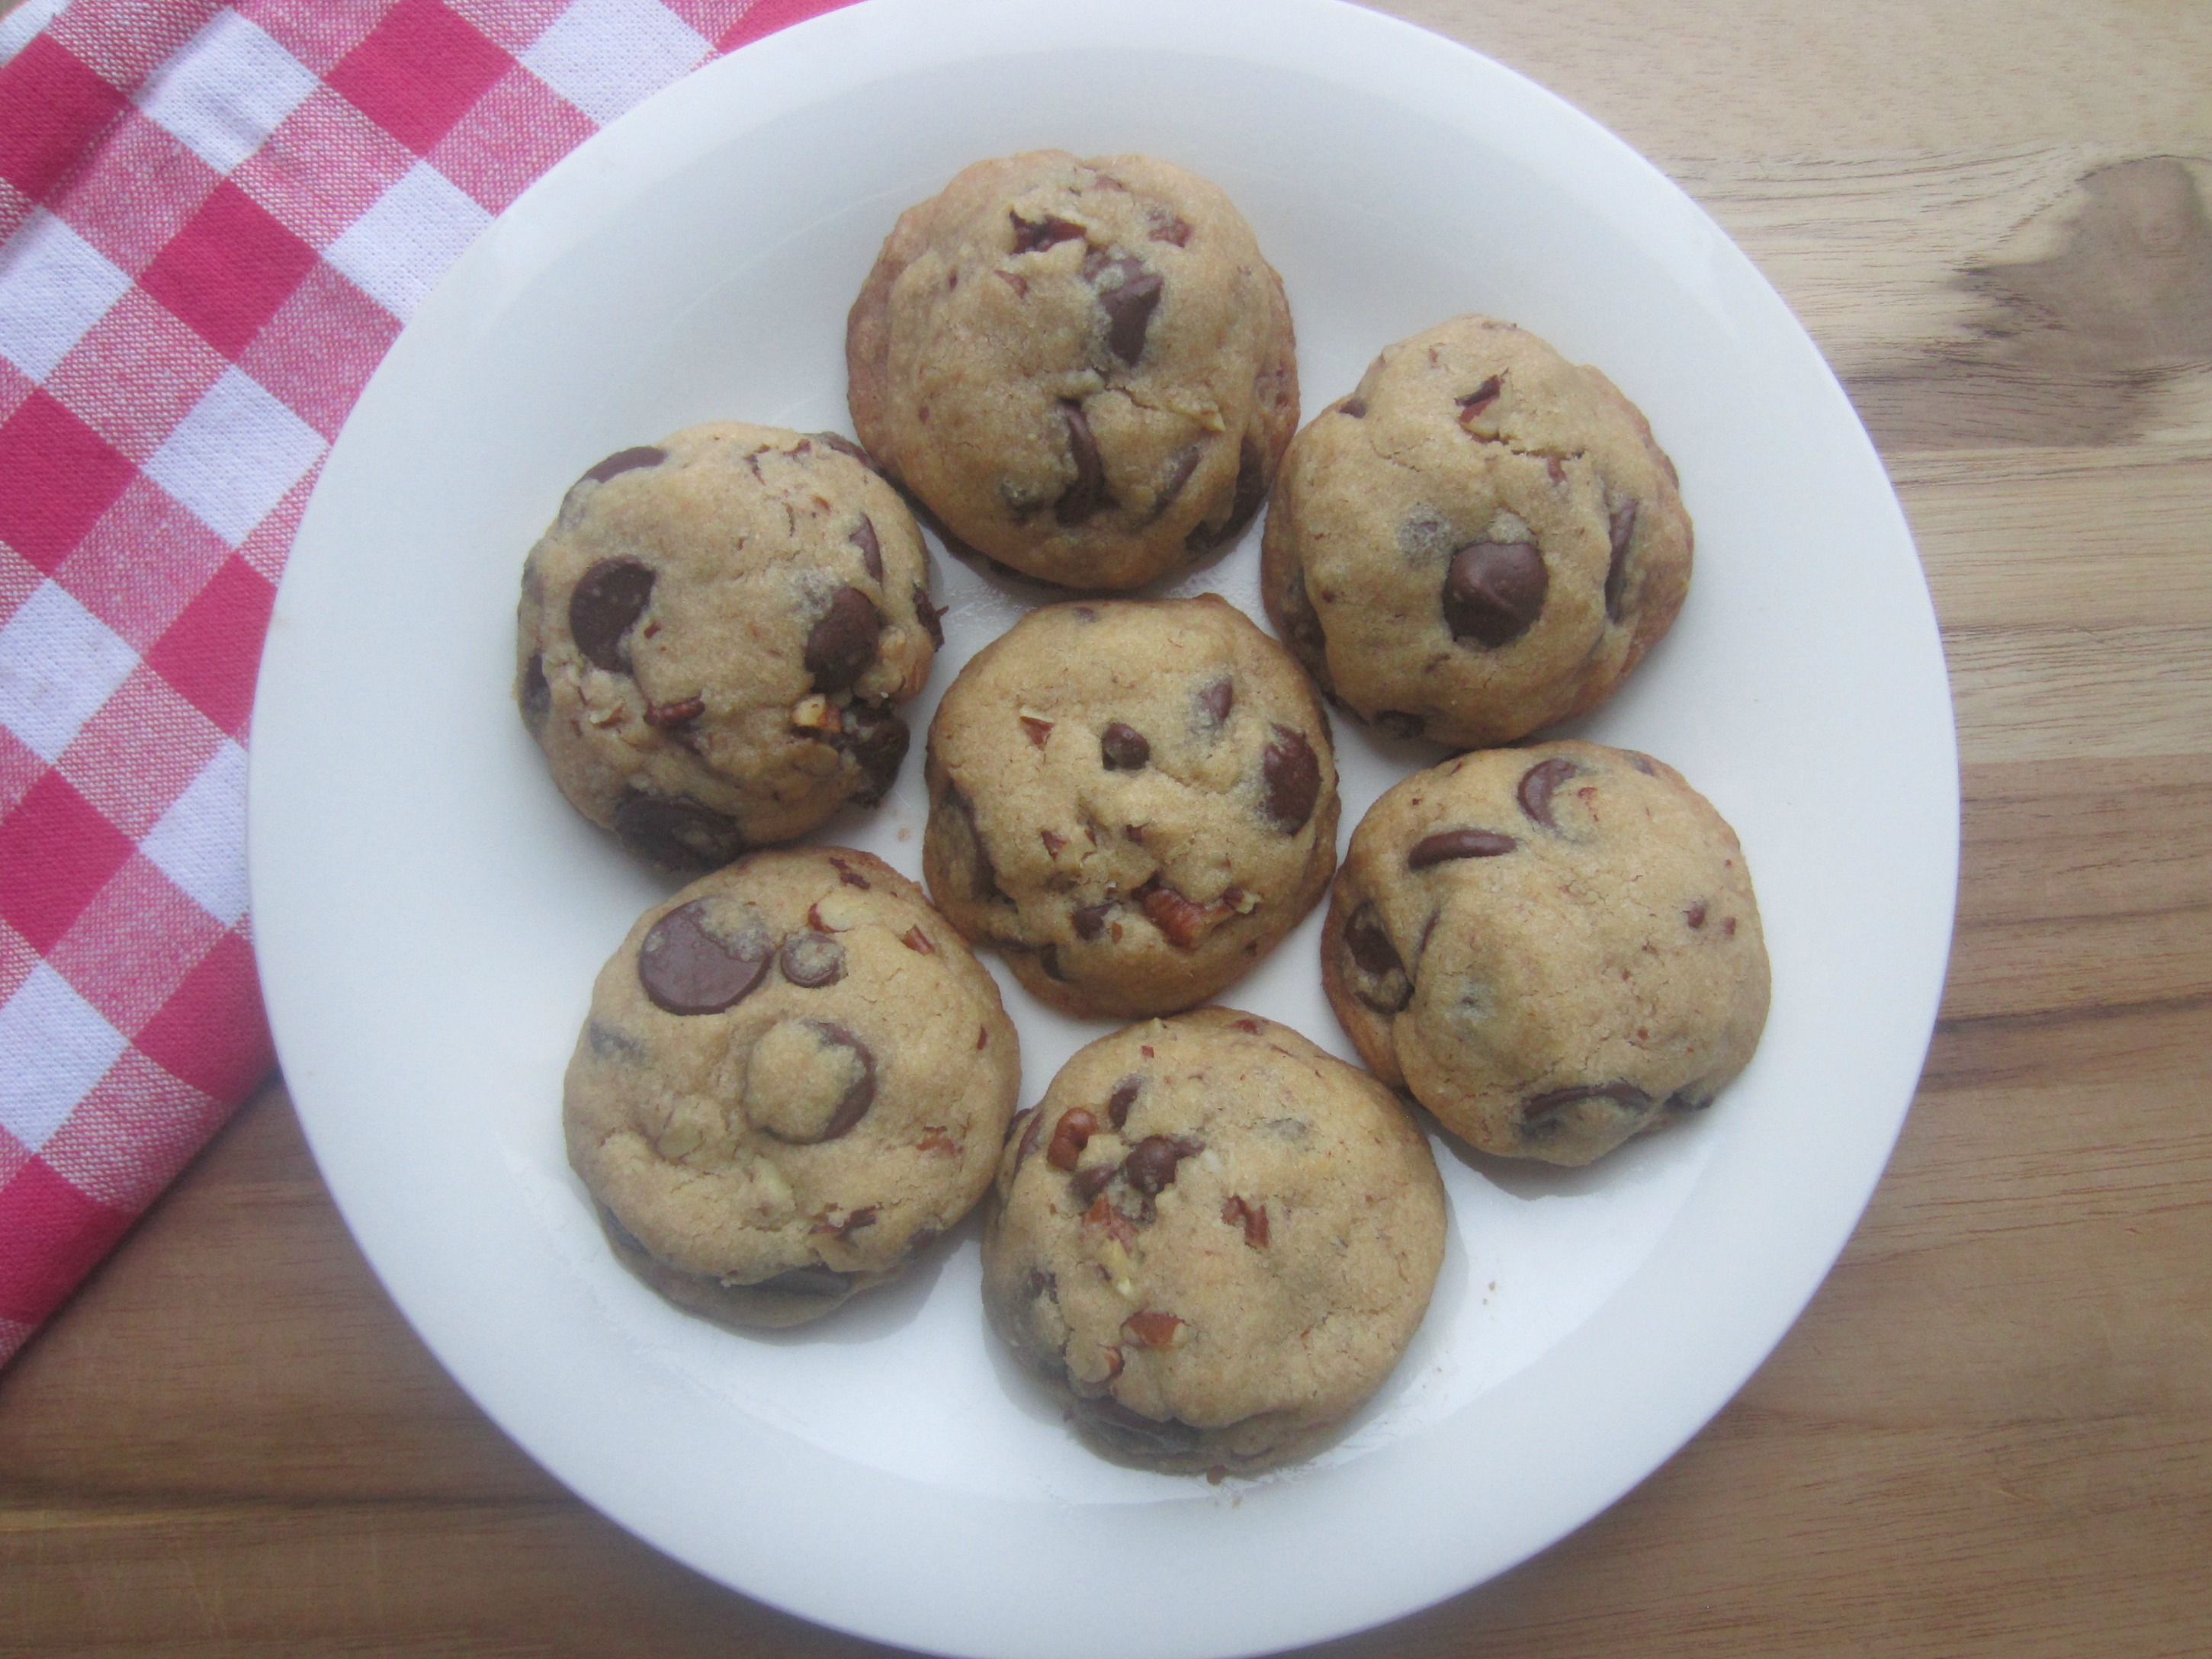 ultimate chocolate chip cookies